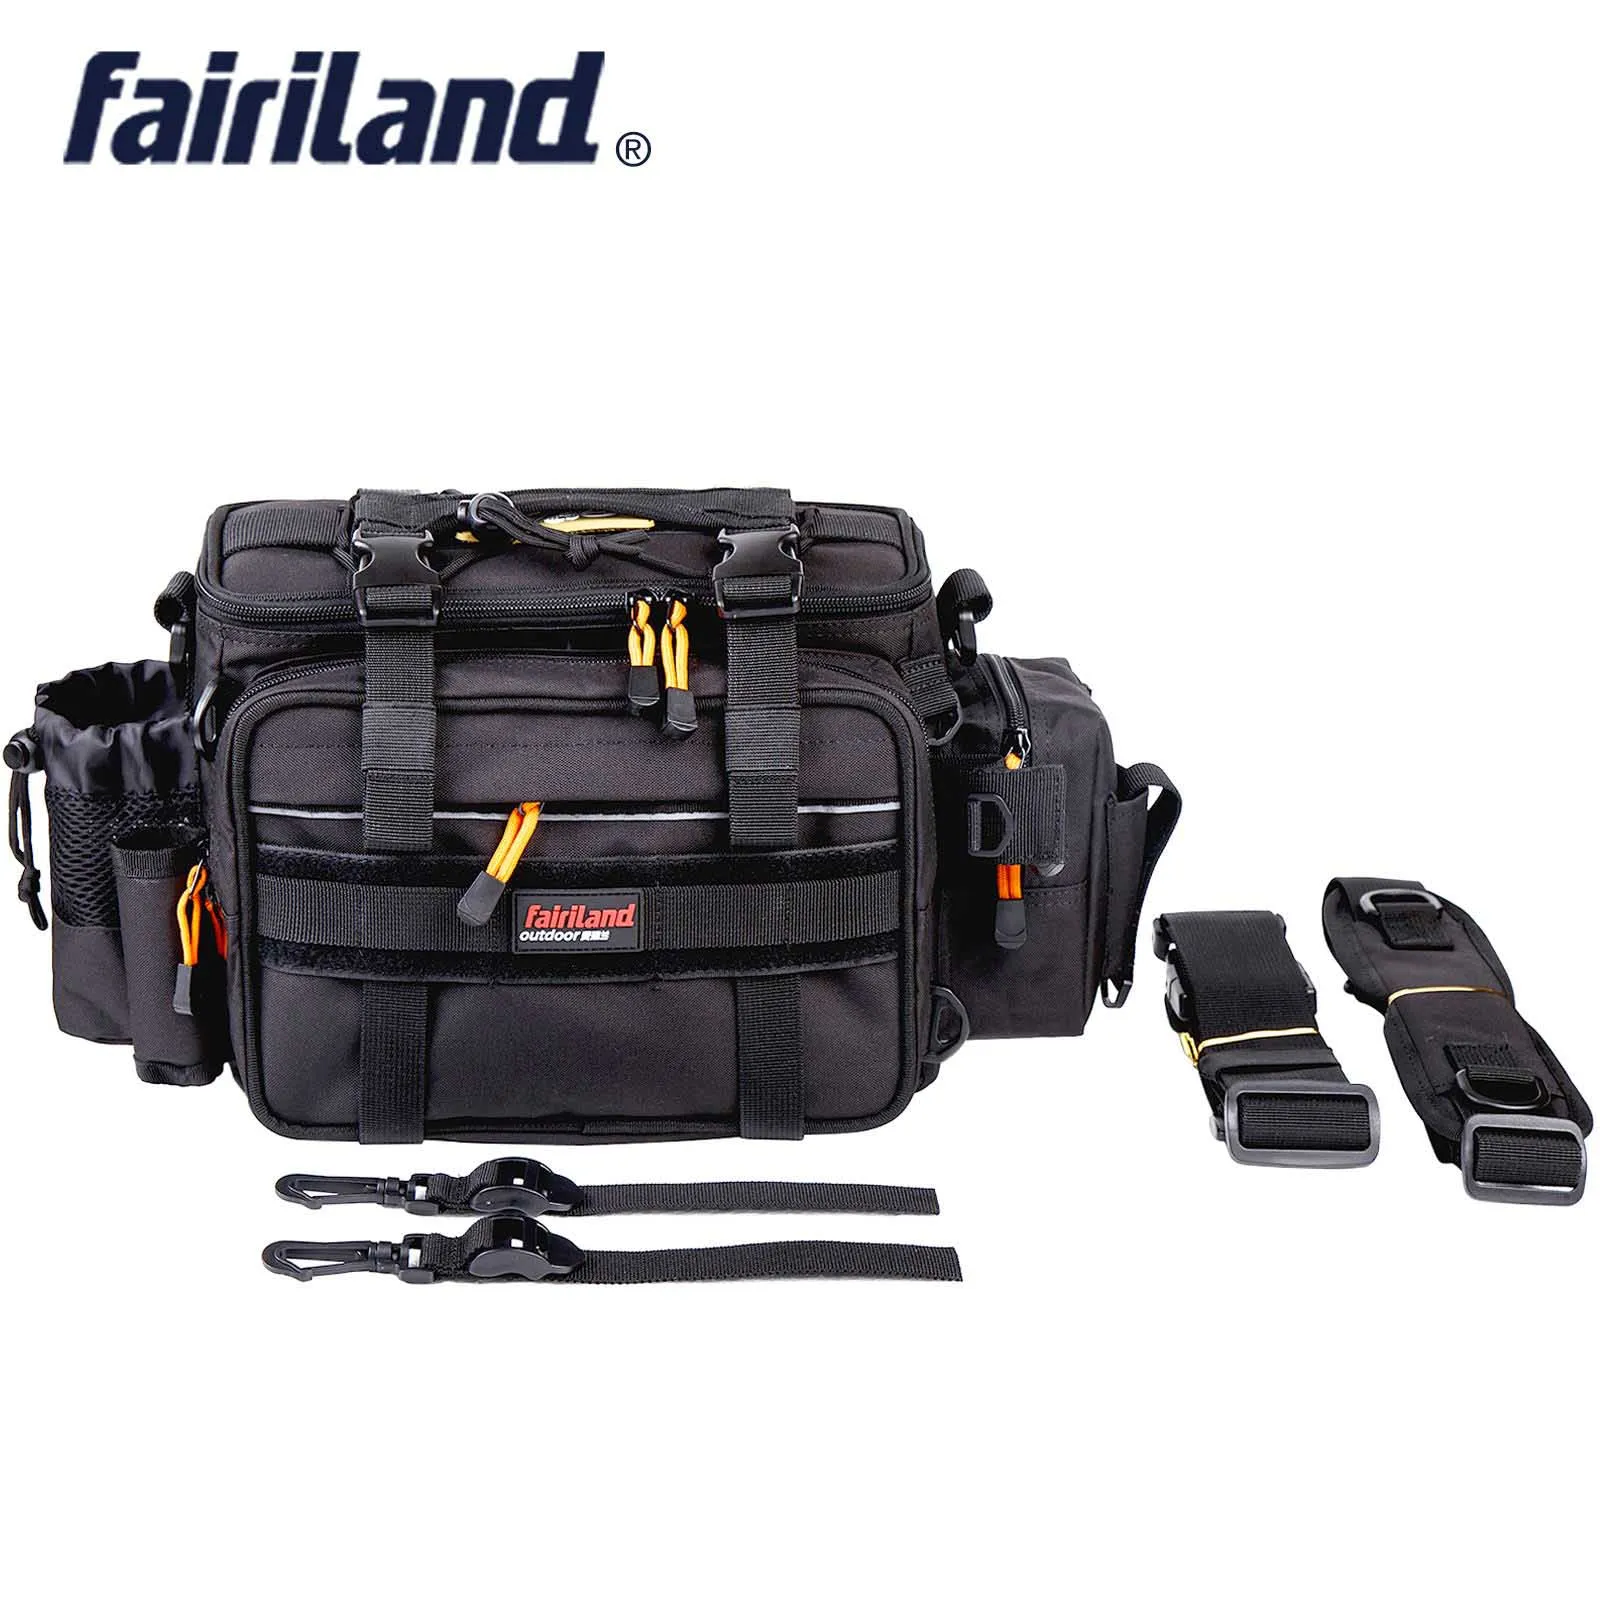 Fairiland Large Size Manly Fishing Bag Multifunctional Shoulder Waist  Fishing Gear Lure Bait Reel Outdoor Bag Tackle Storage From Fairiland,  $58.96